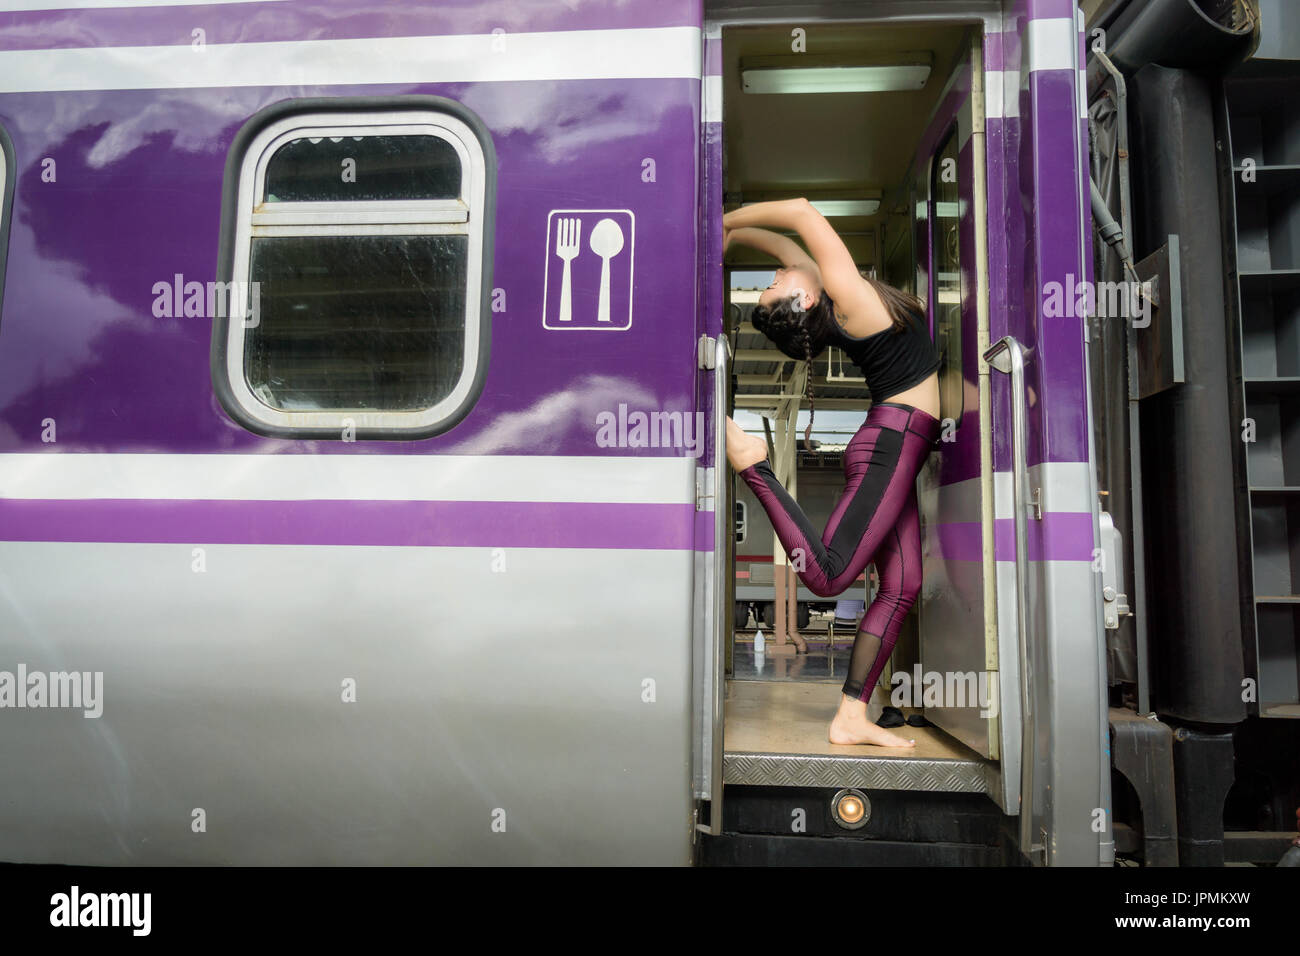 Healthy flexible young girl  doing yoga poses inside a train car wearing fitness clothes Stock Photo